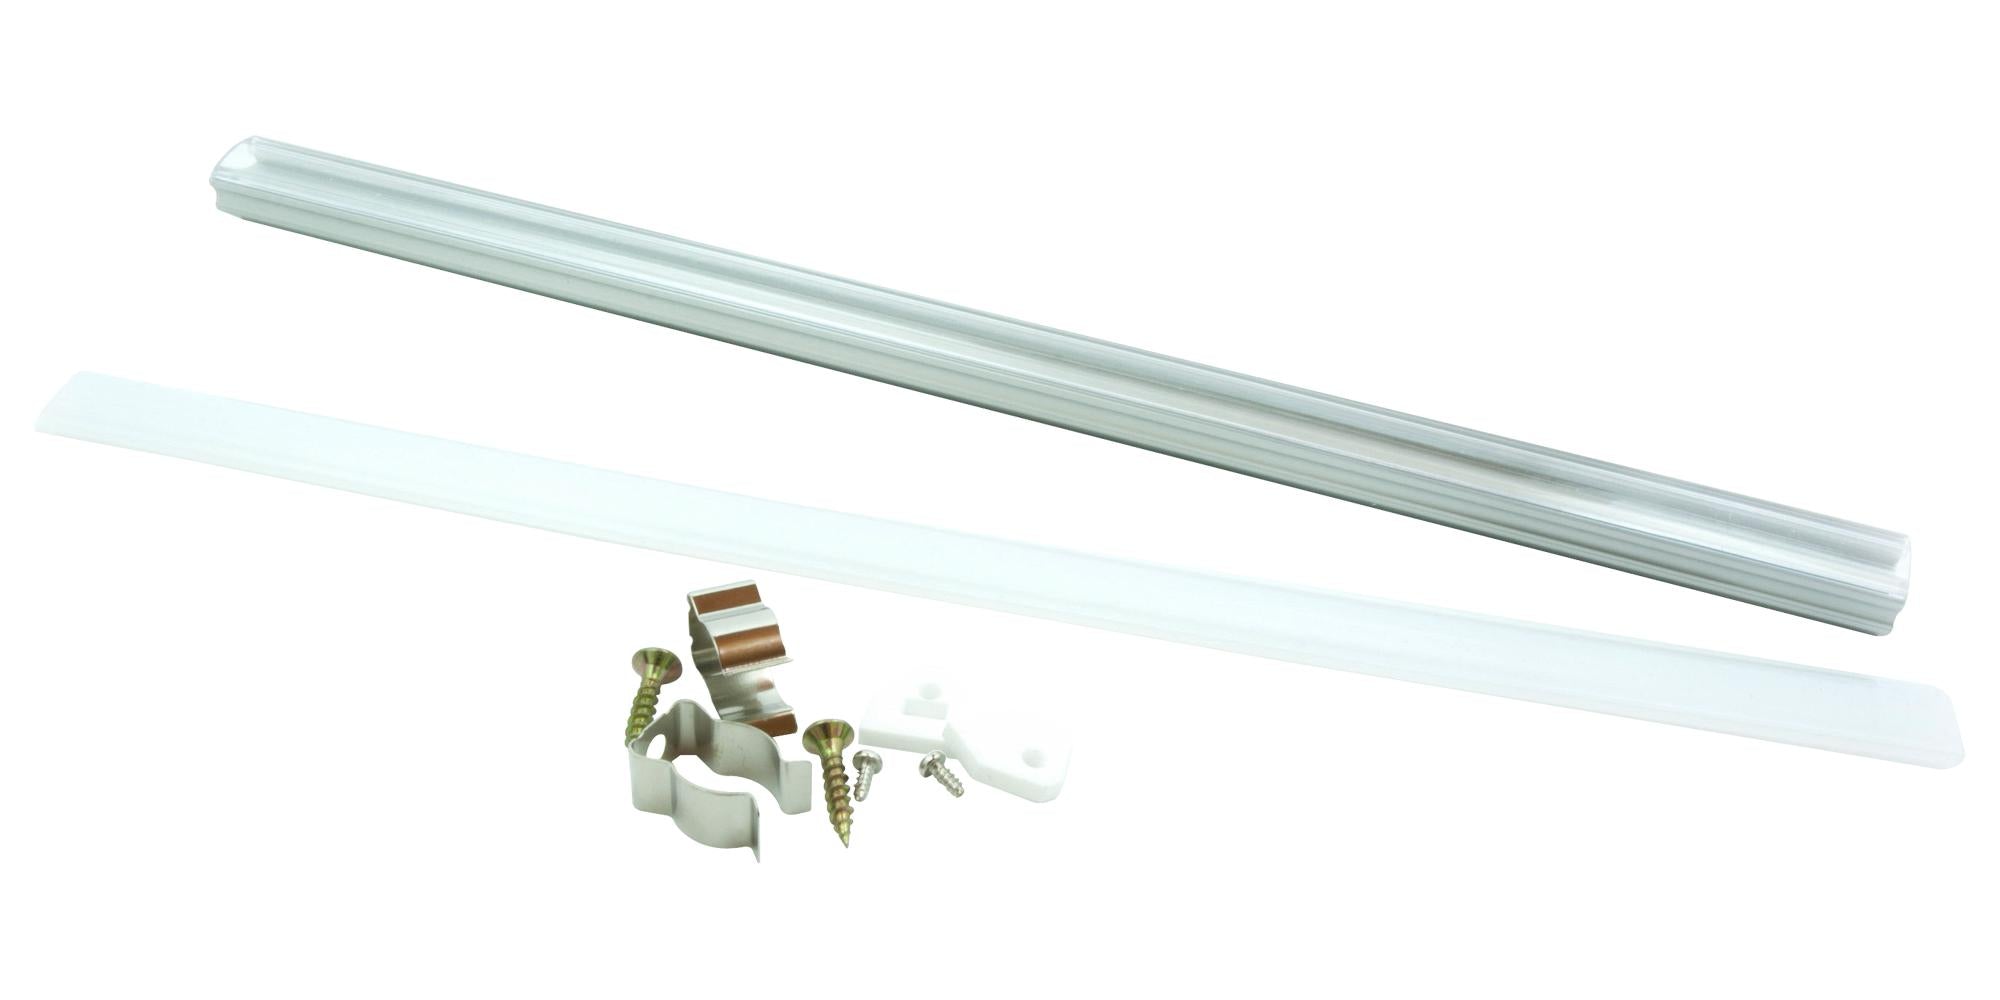 ILK-FLEXEXT-0310-002. KIT, LED STRIP, ANGLED EXTRUSION, 310MM INTELLIGENT LED SOLUTIONS